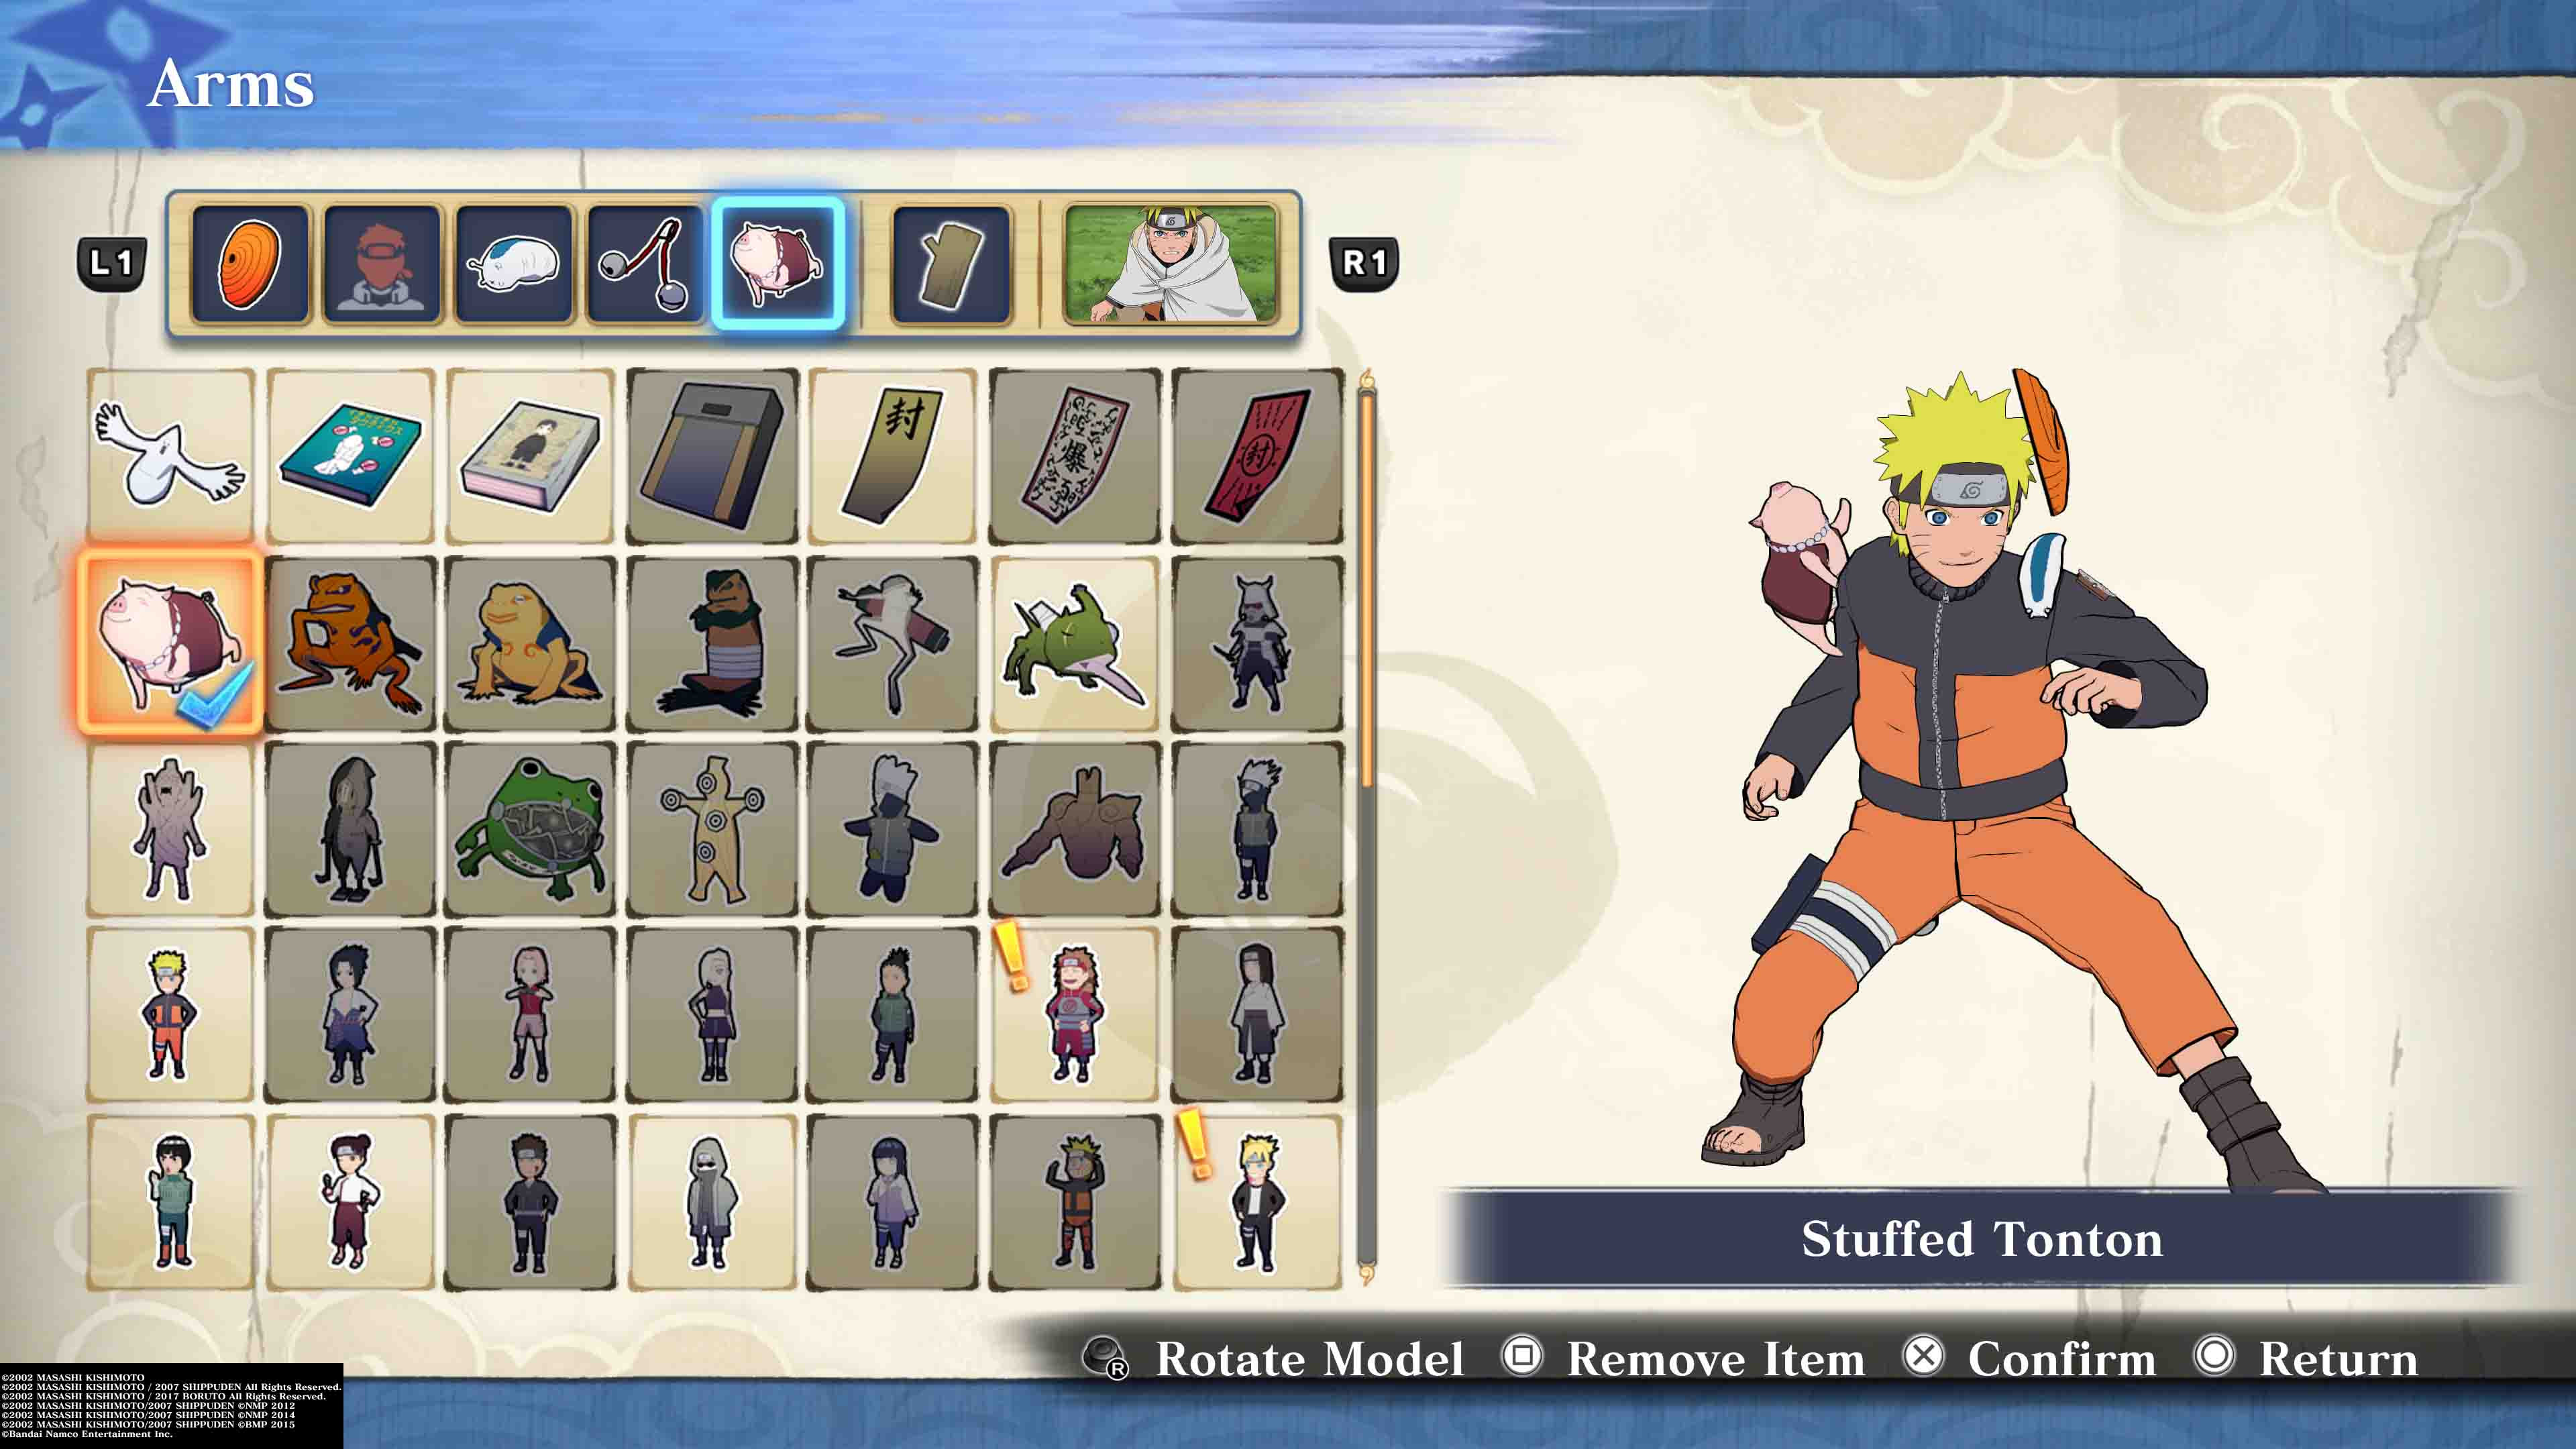 Naruto x Boruto: Ultimate Ninja Storm Connections tier list - Who are the  best ninjas in the game